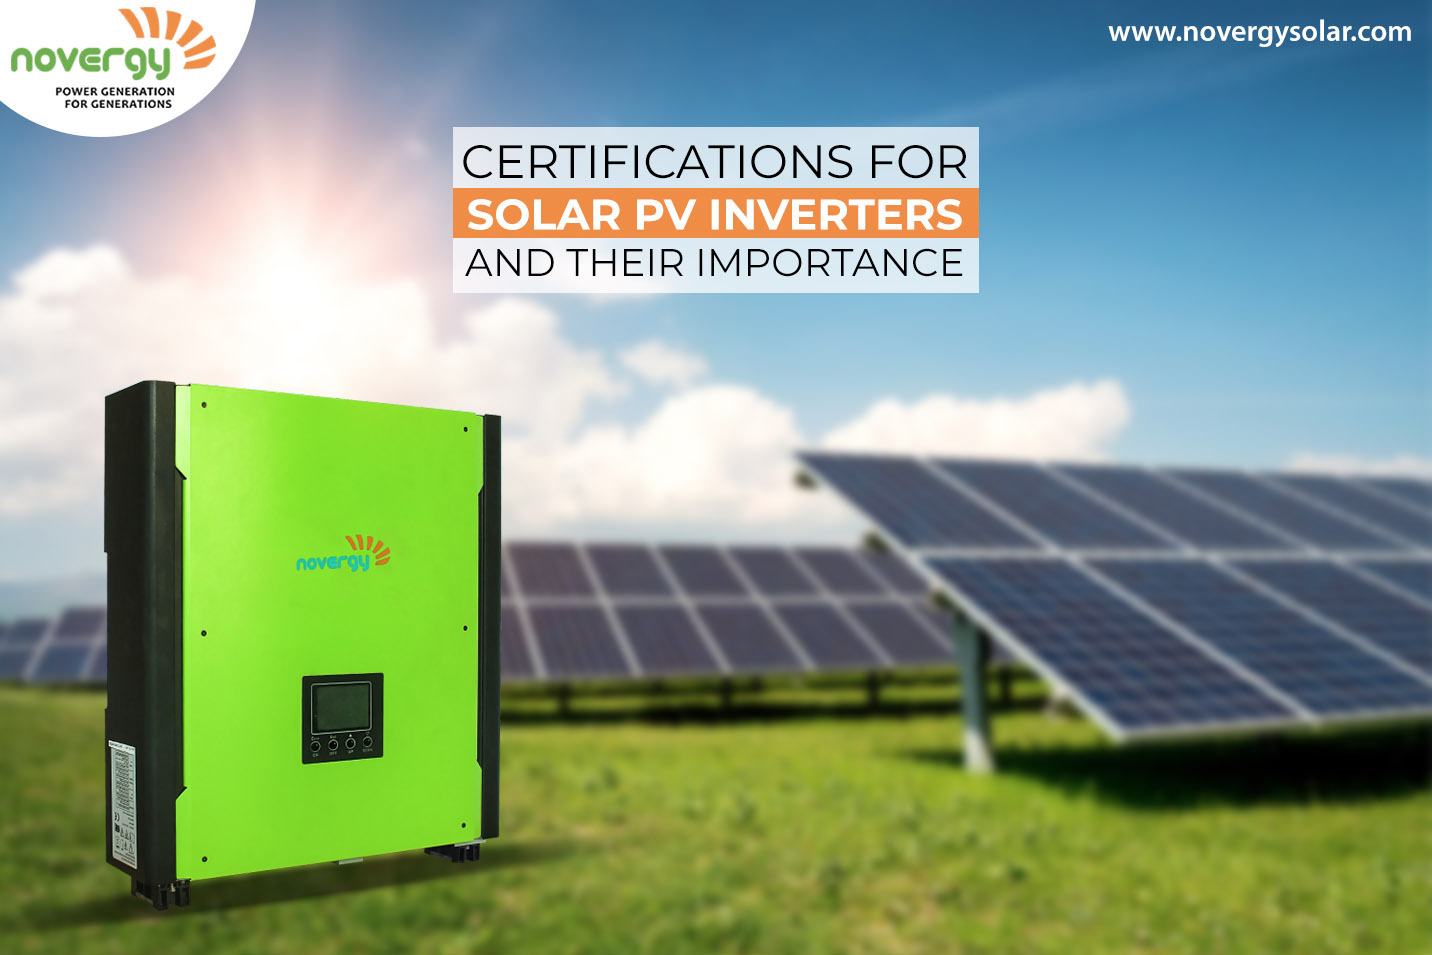 Certifications for solar PV inverters and their importance